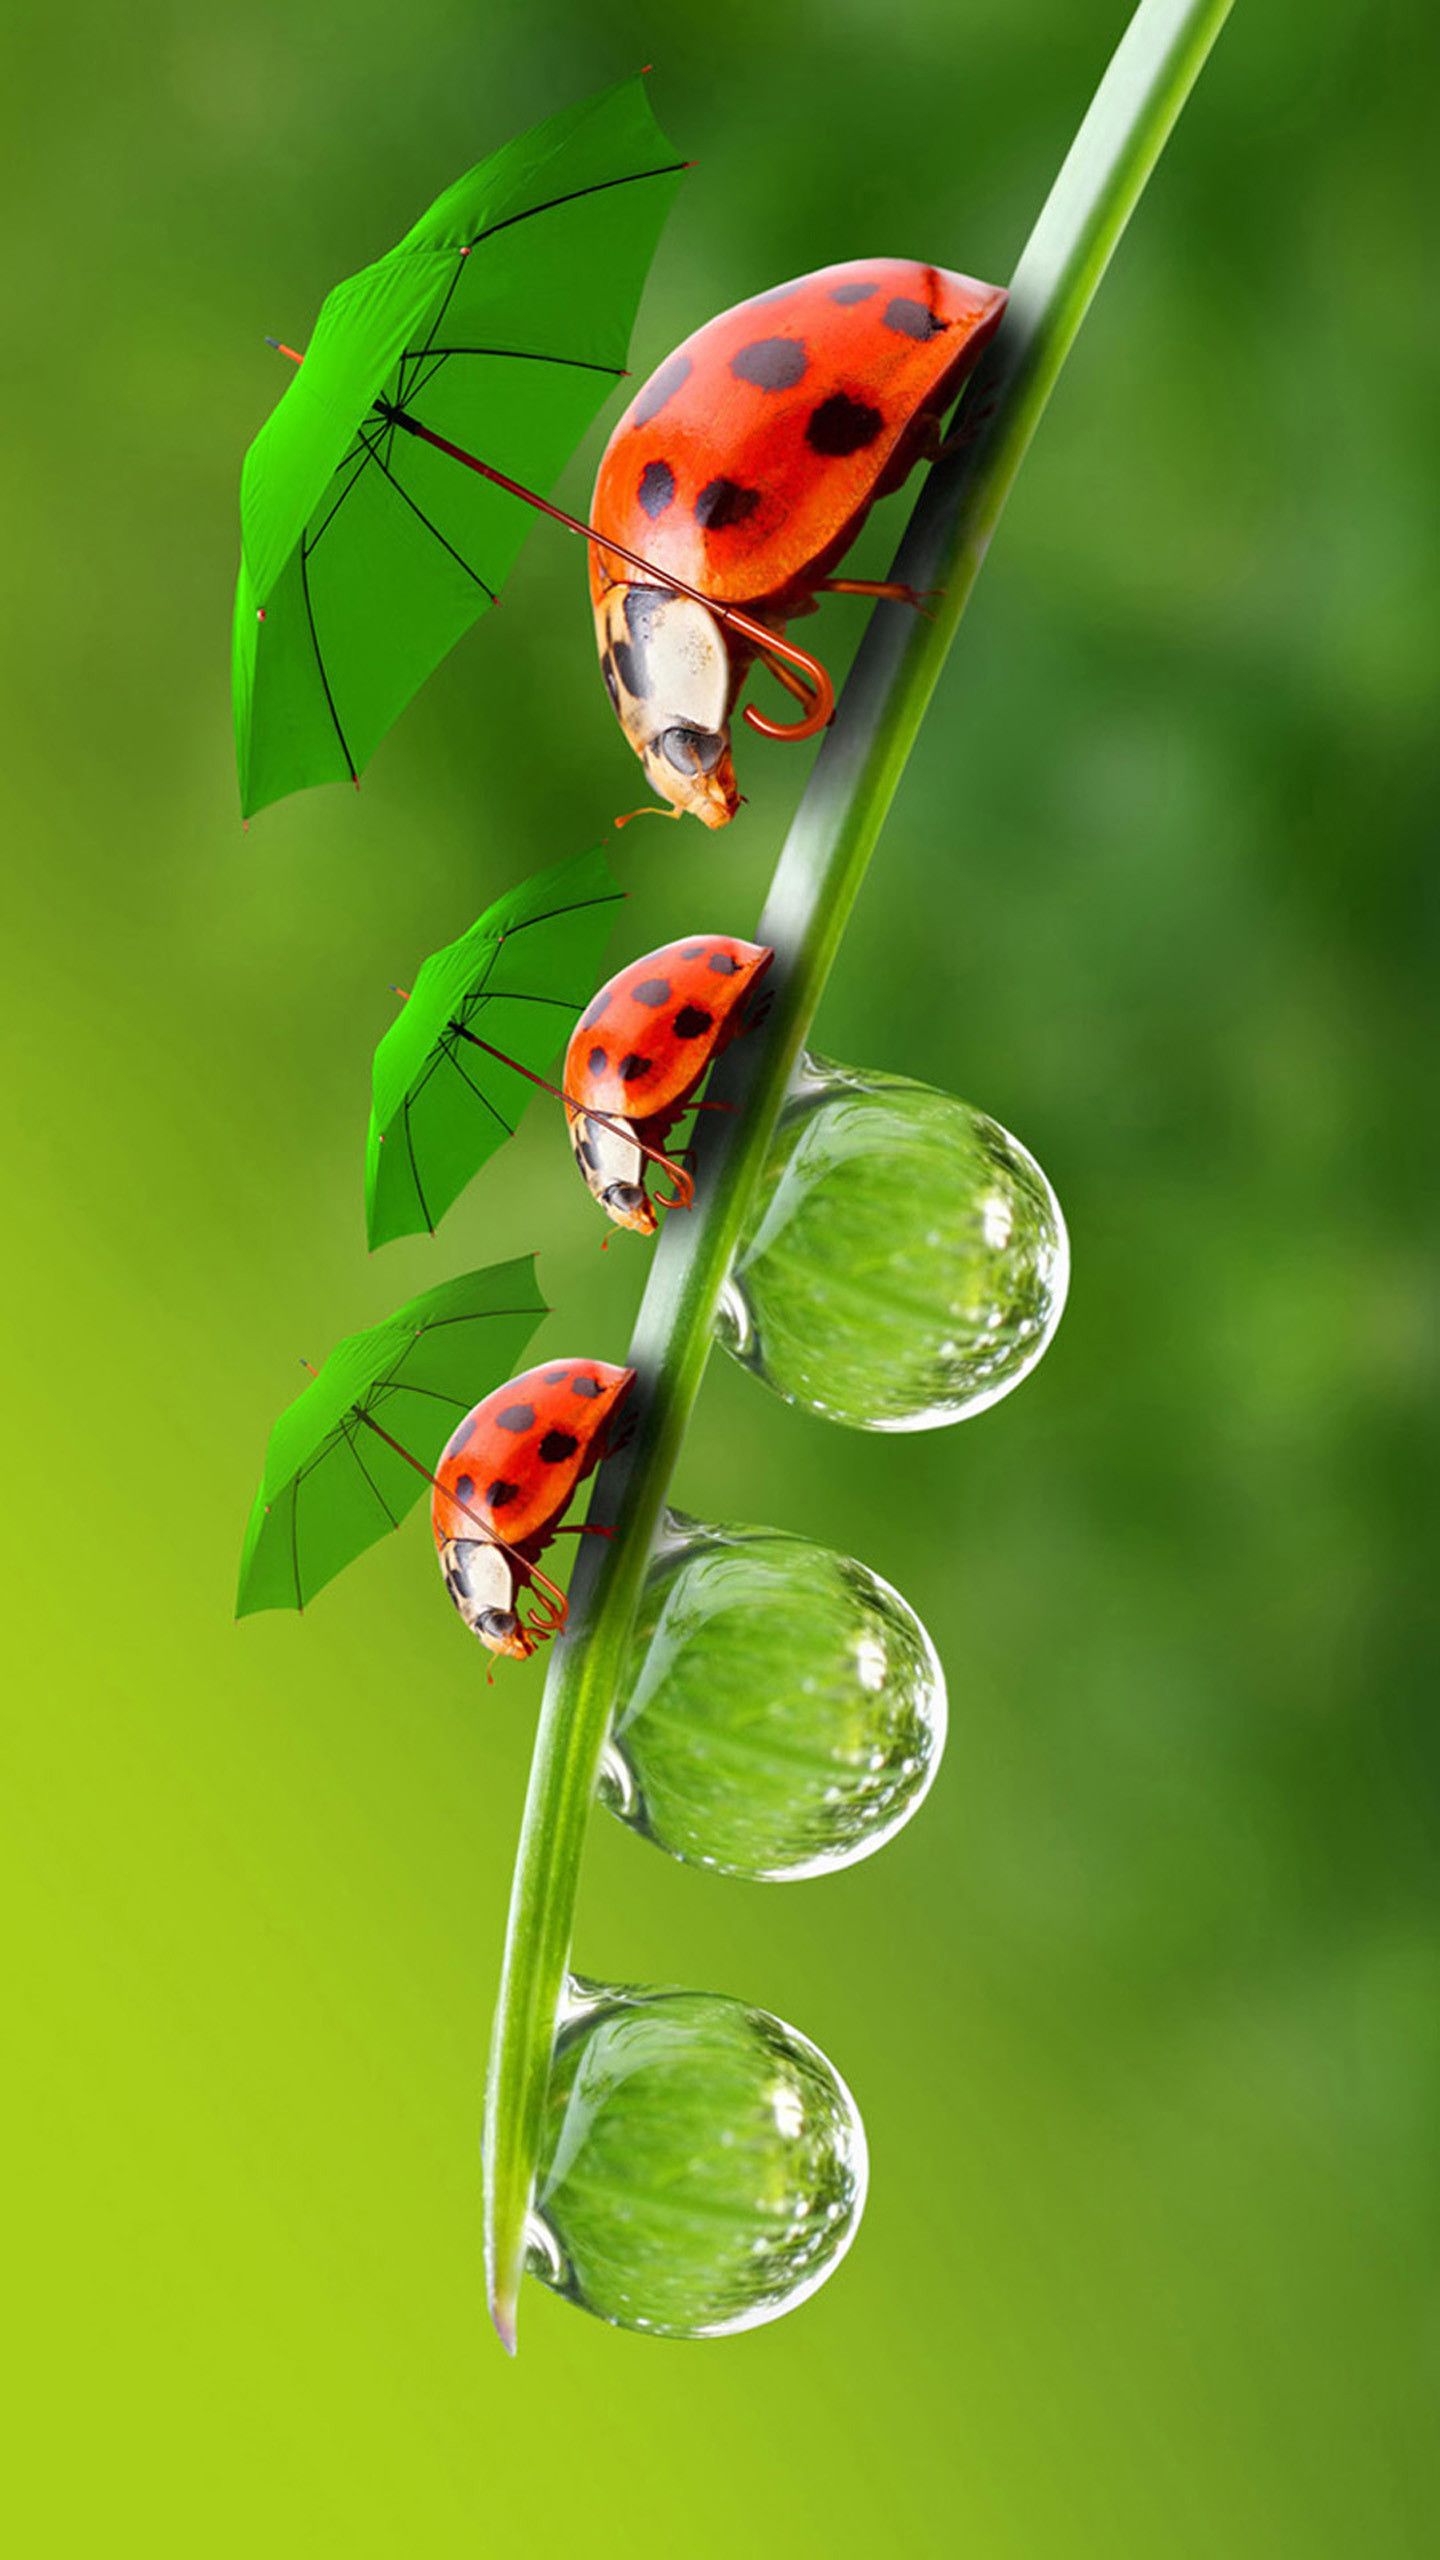 Download Wallpaper For Android - Ladybug Wallpaper Iphone X , HD Wallpaper & Backgrounds